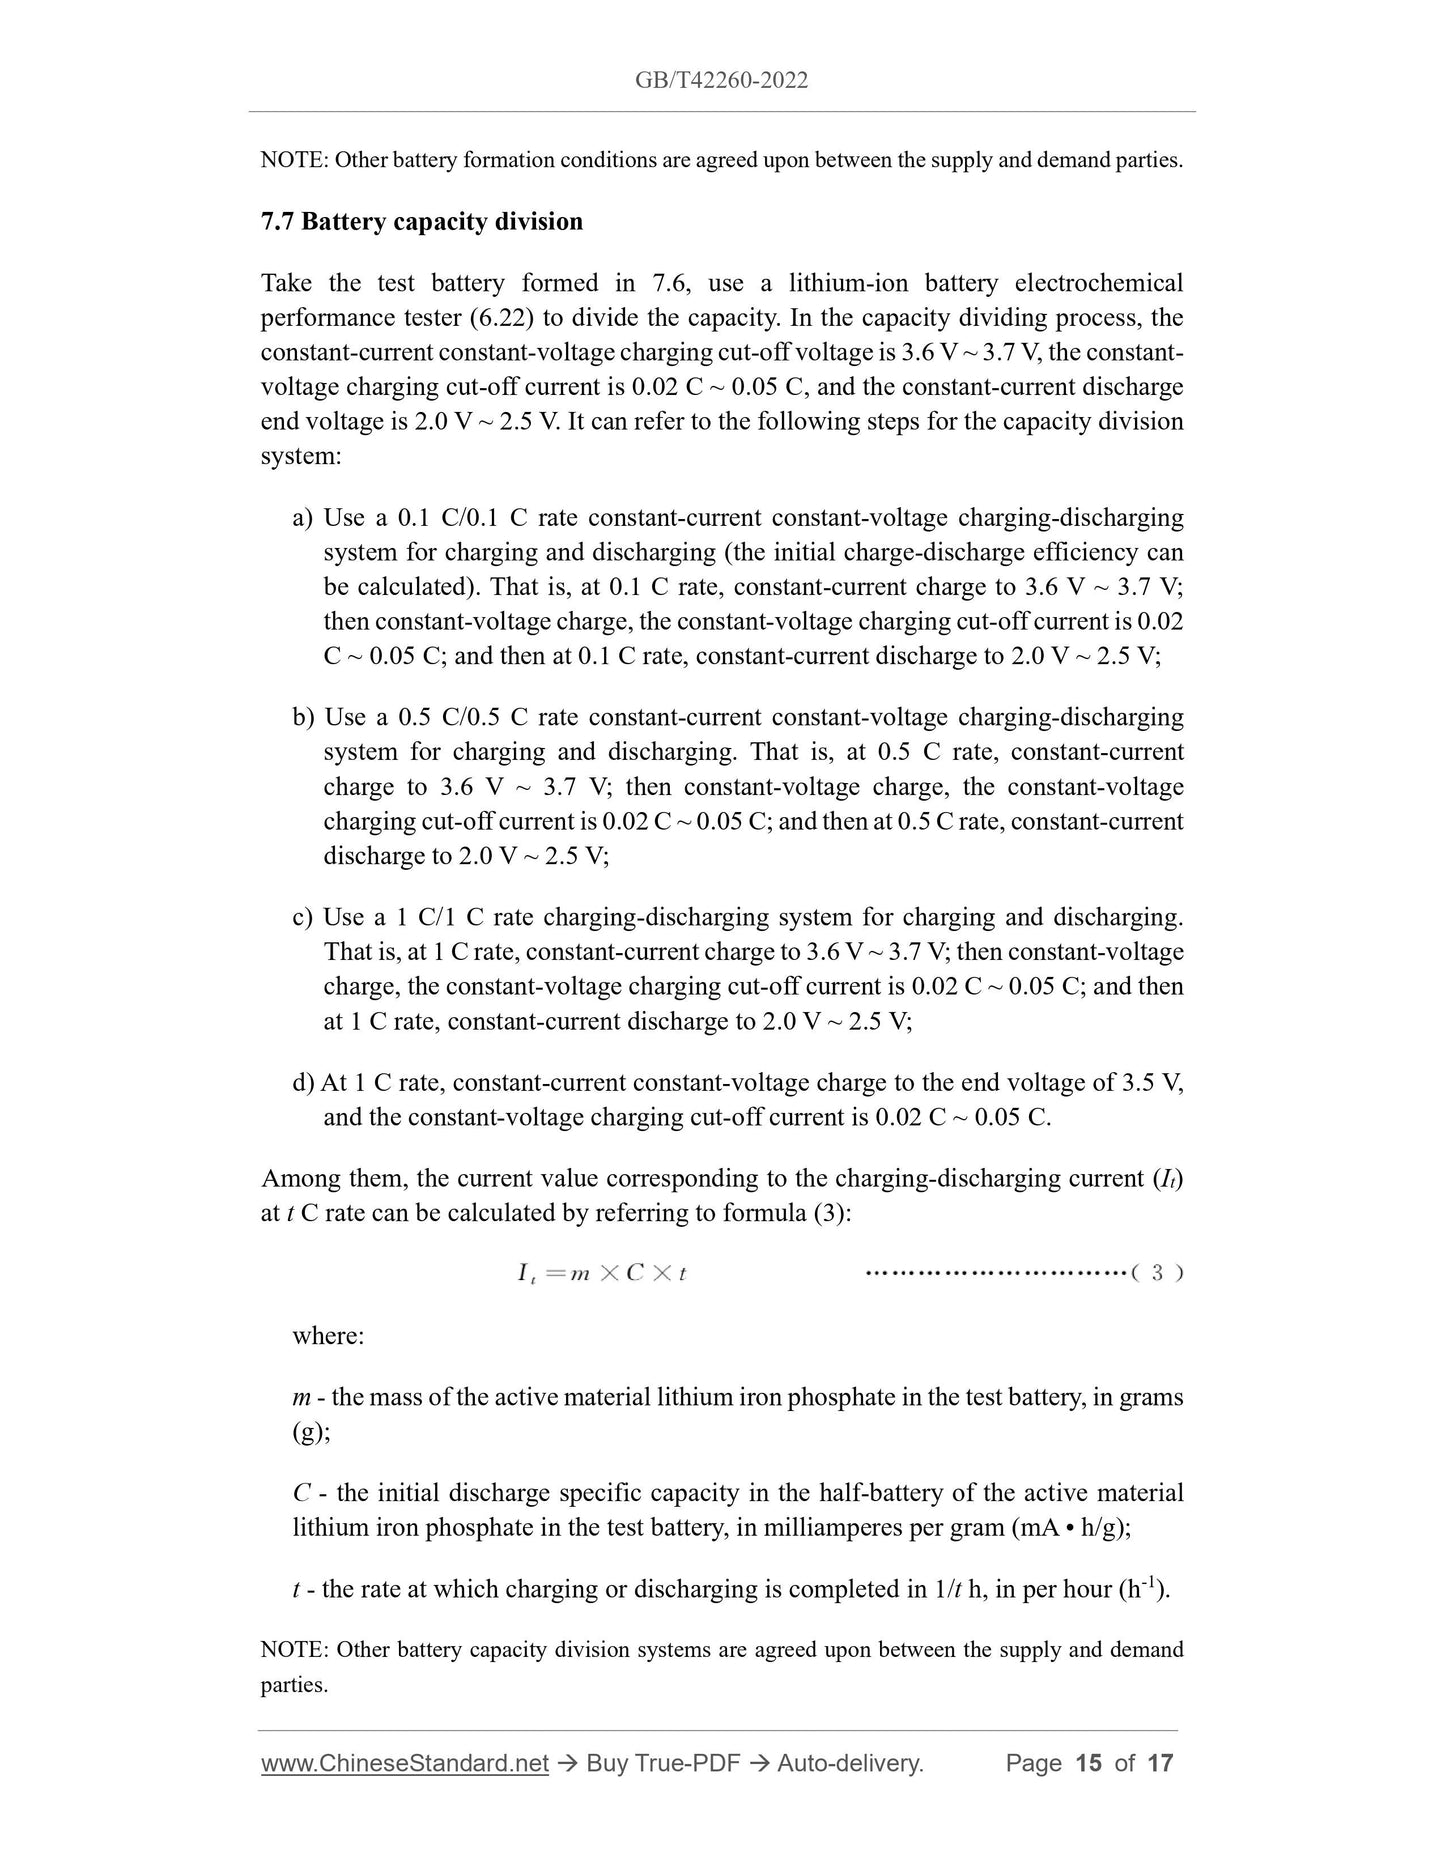 GB/T 42260-2022 Page 10